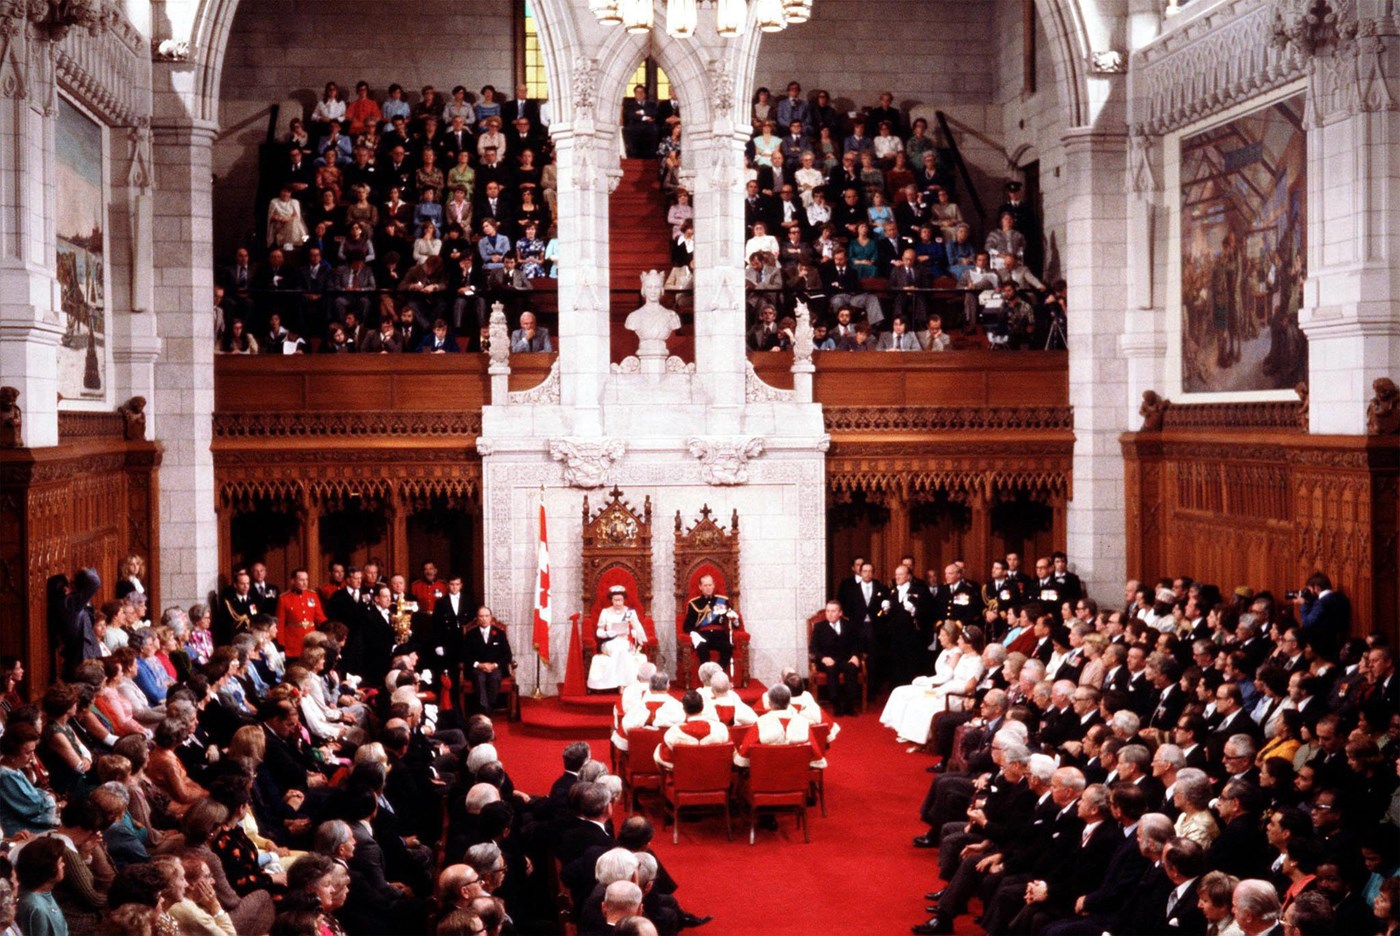 Prince Philip accompanies Queen Elizabeth as she reads the Speech from the Throne in the Senate Chamber on October 18, 1977, officially opening the third session of Canada’s 30th Parliament. (Photo credit: The Canadian Press)